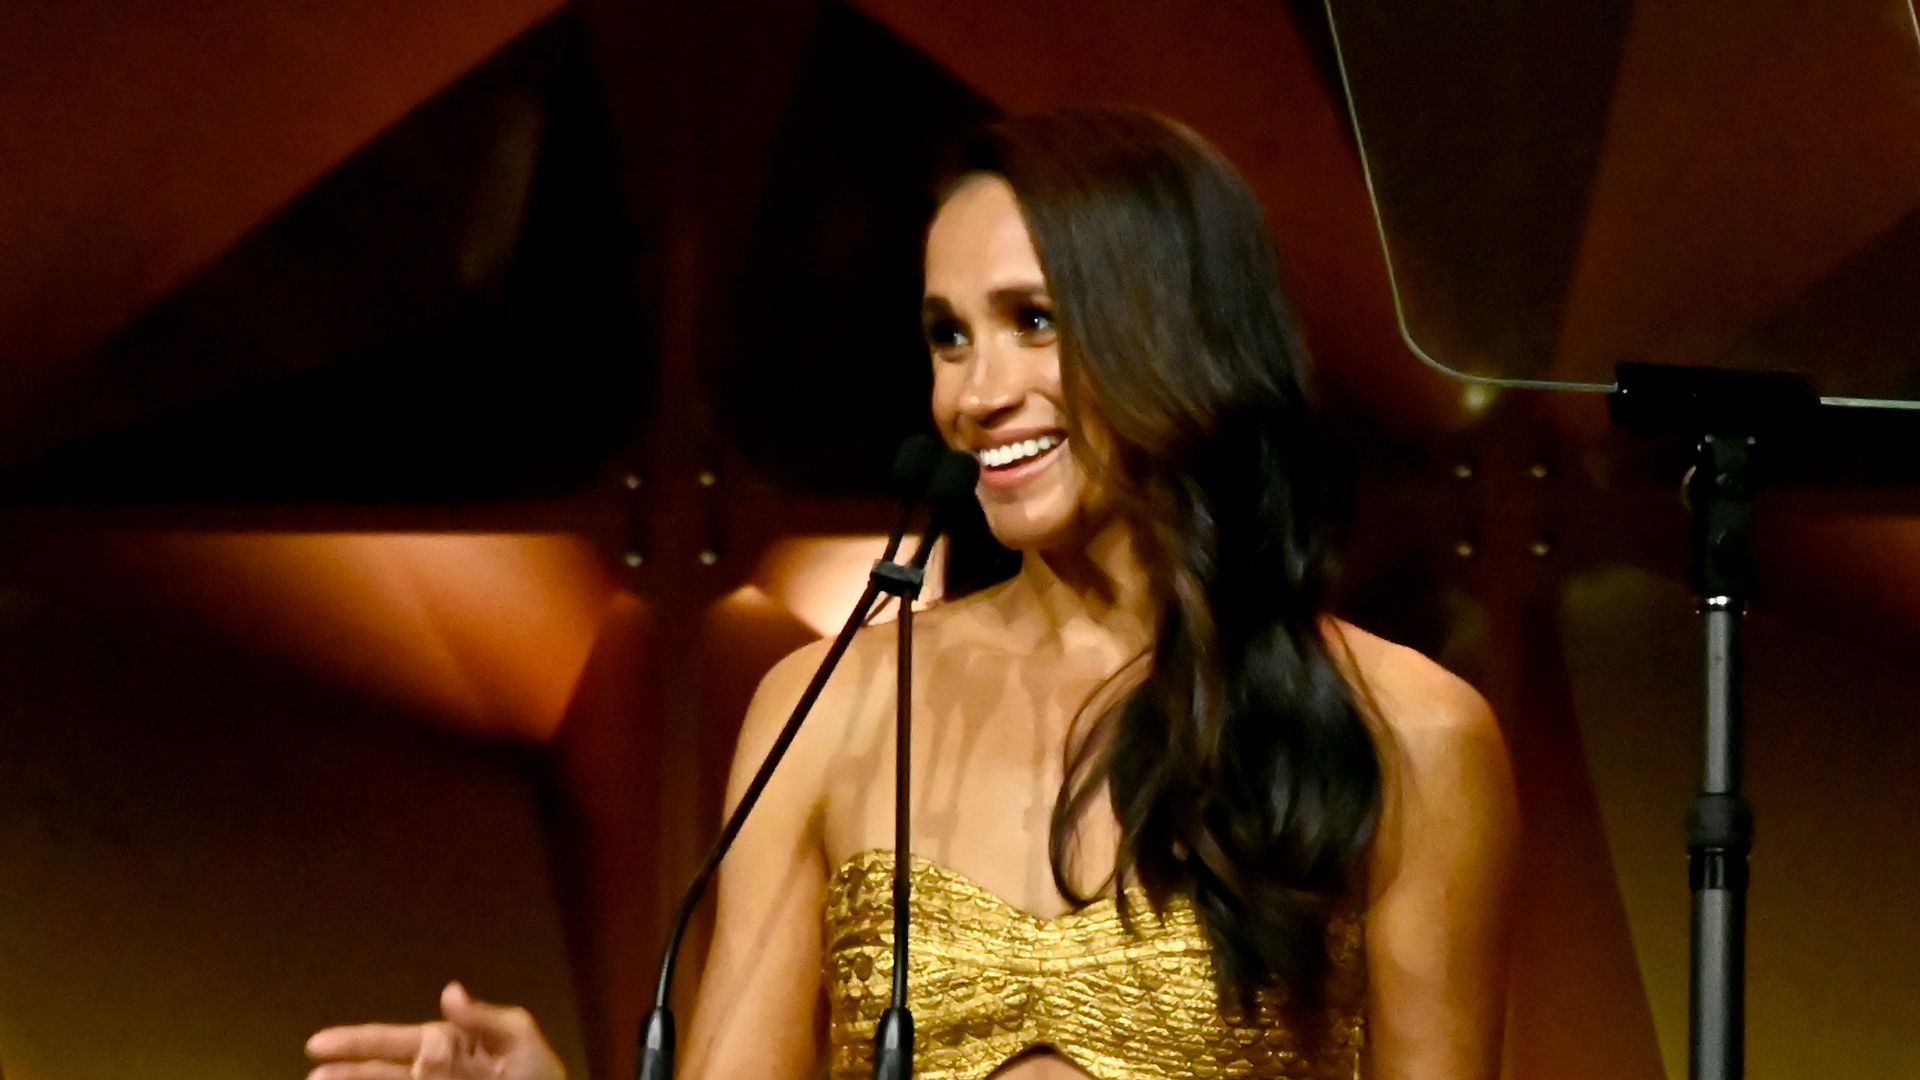 Meghan Markle recieved the Woman of Vision award